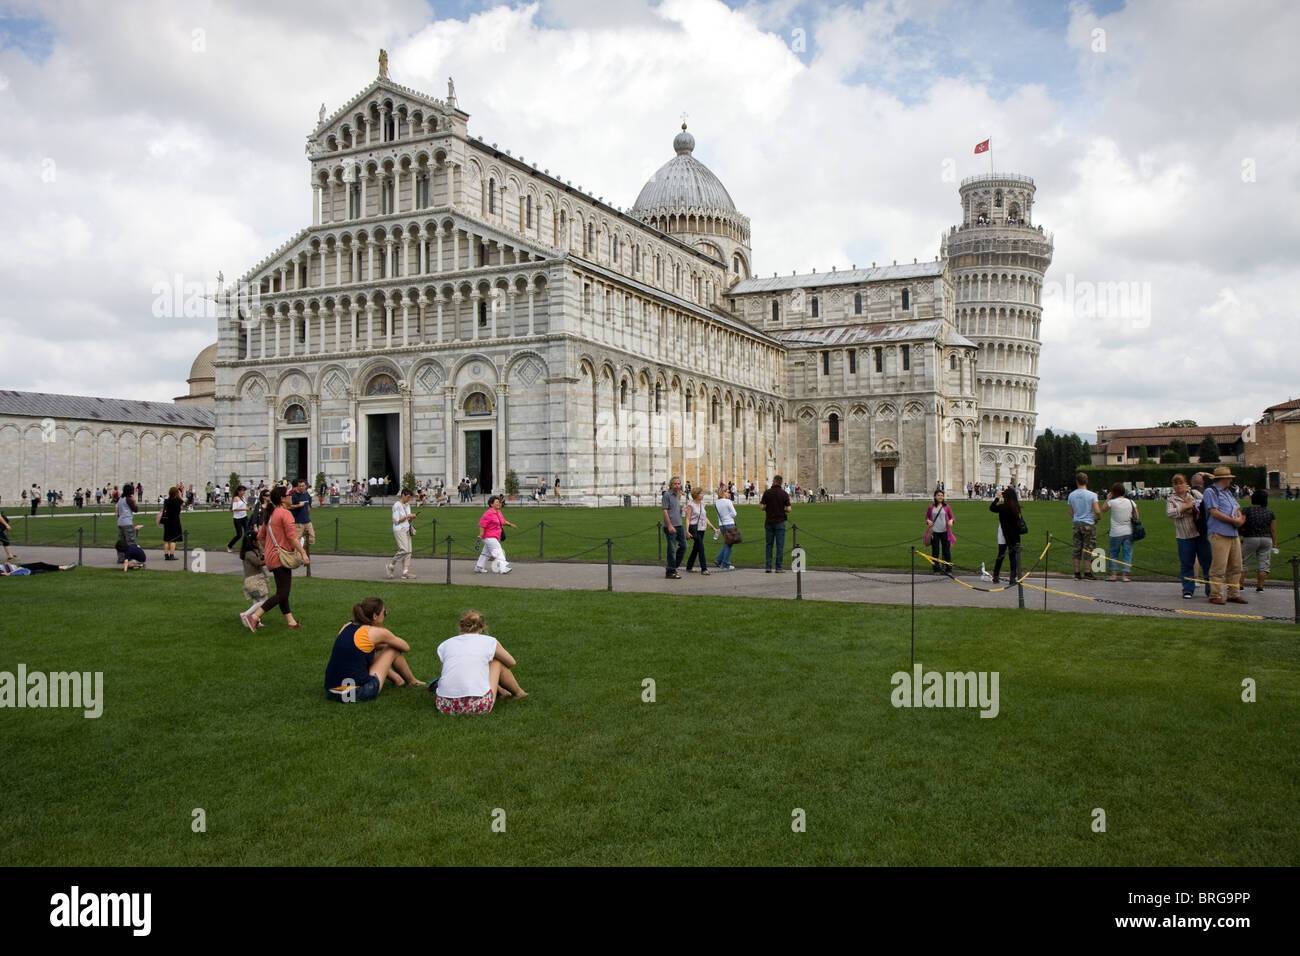 The Catherdral and Leaning Tower of Pisa Stock Photo